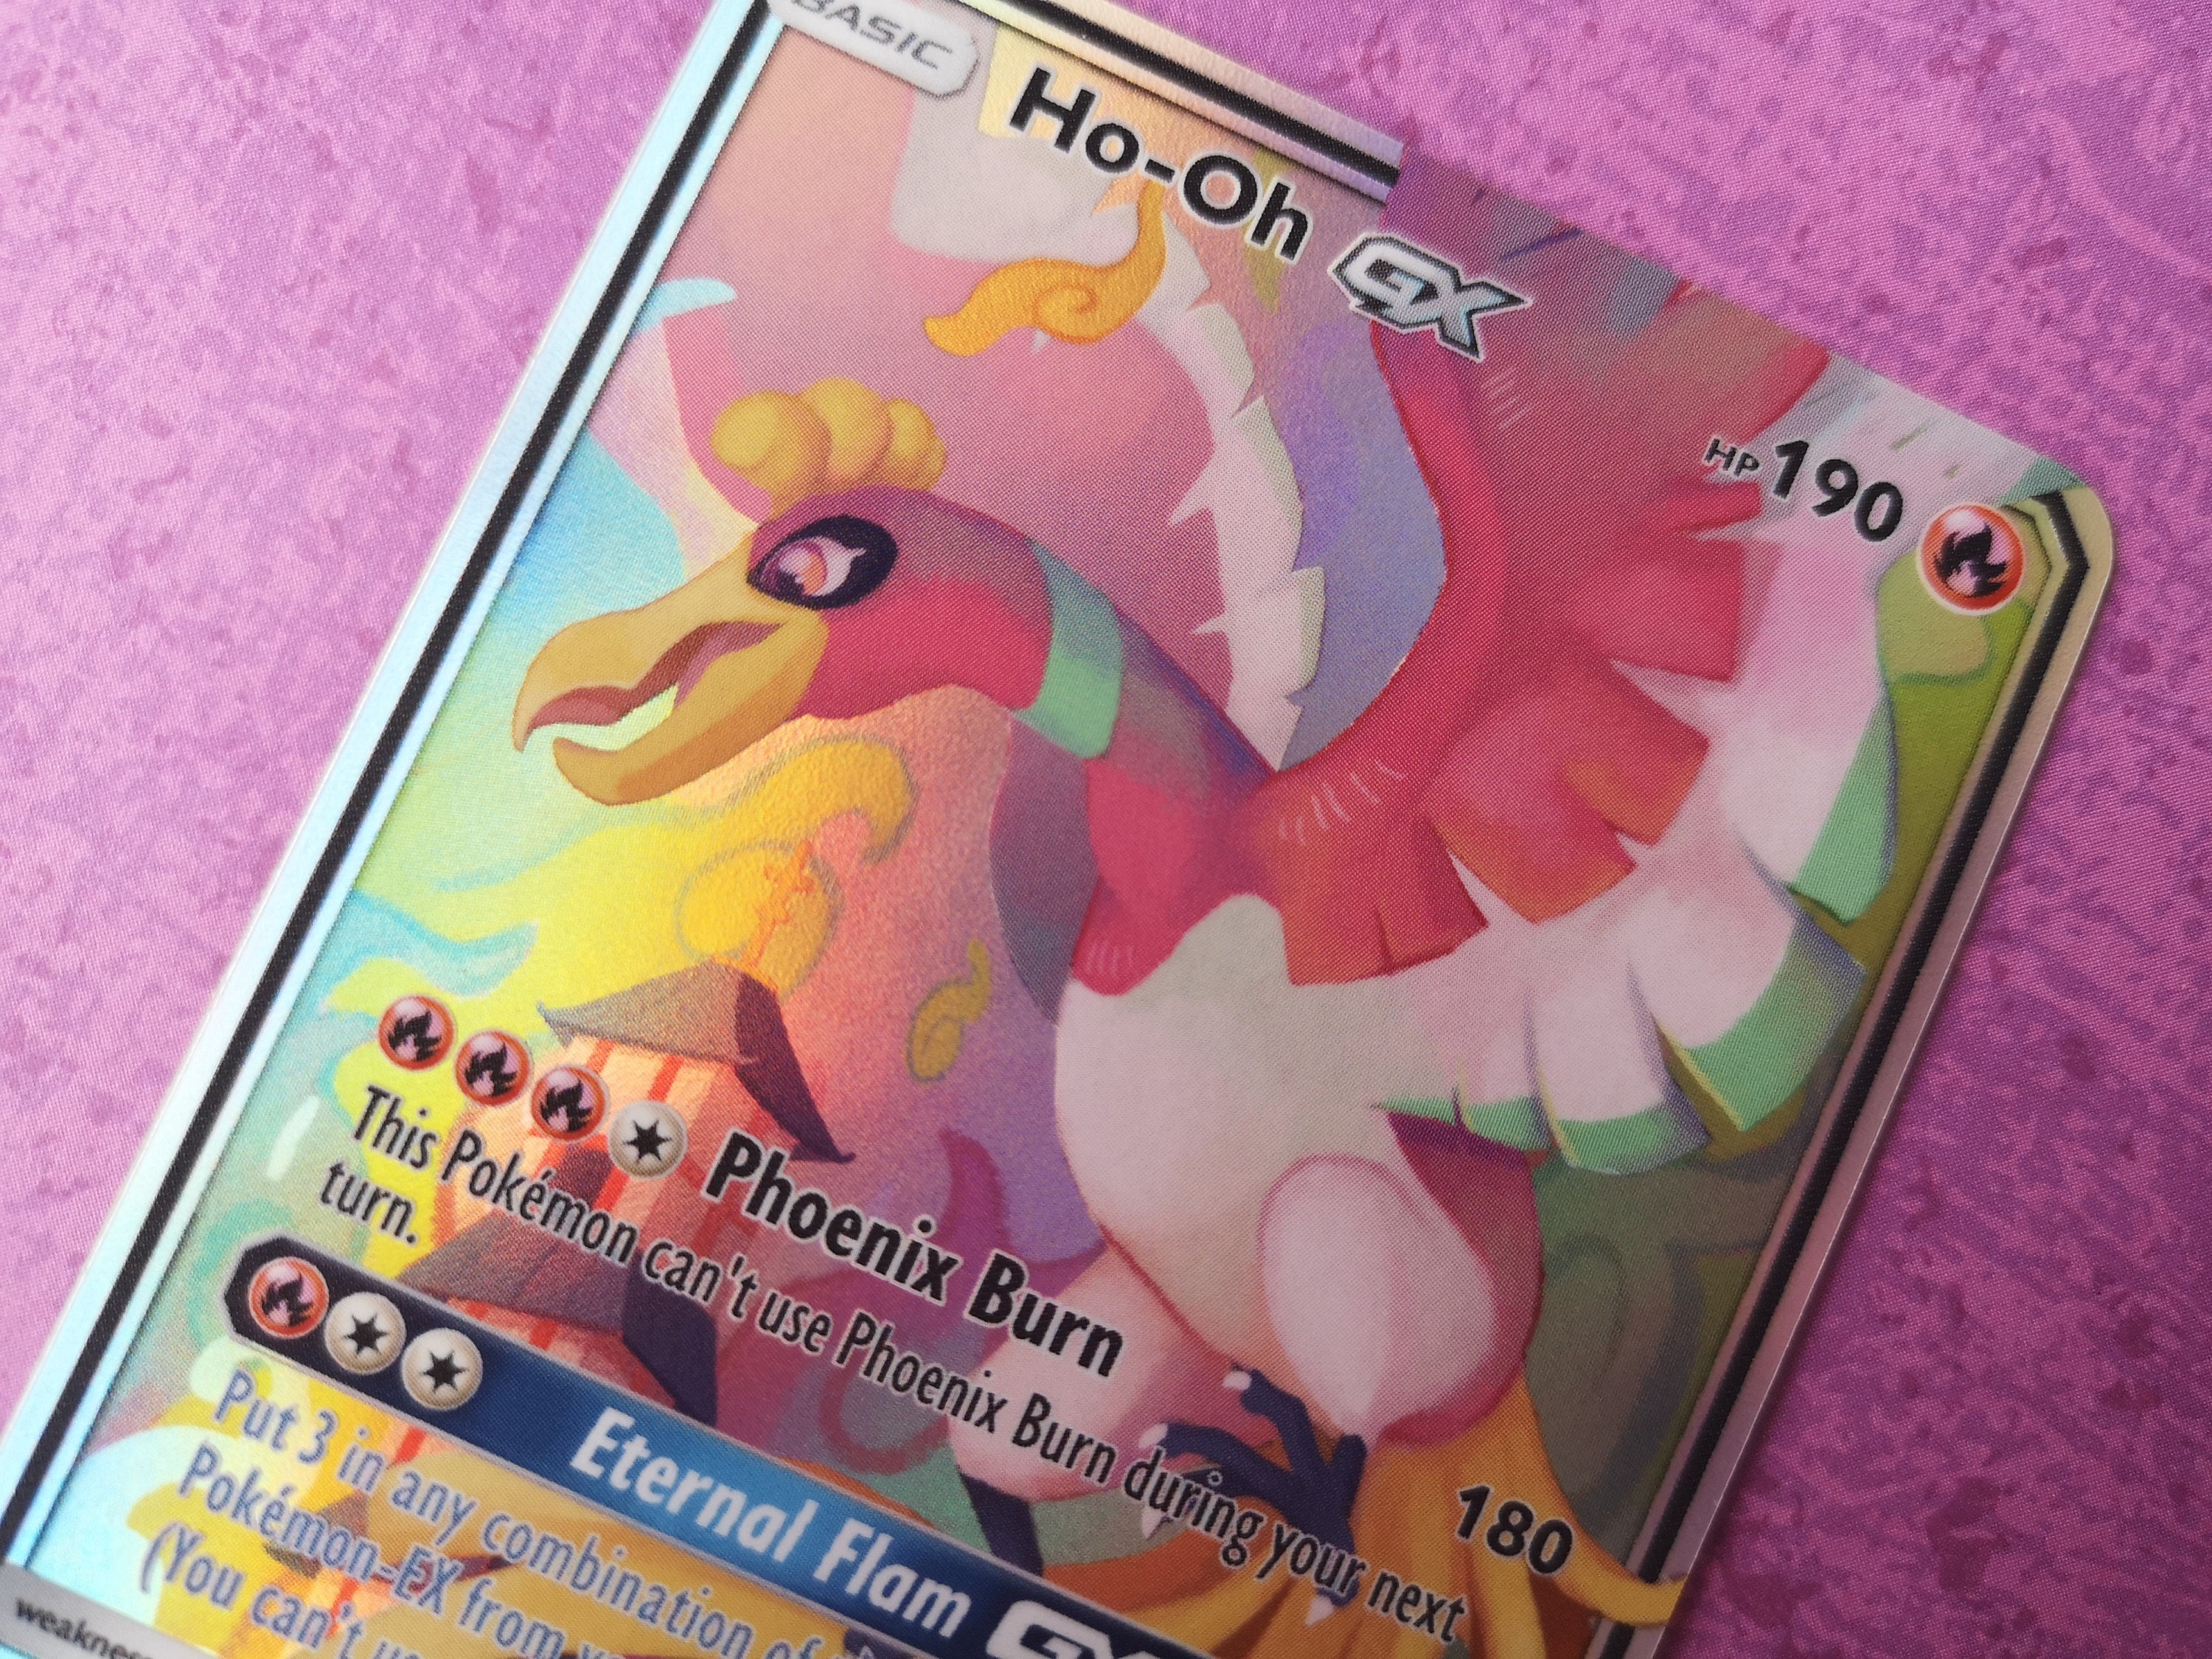 Ho-Oh GX Pokemon Card Price Guide – Sports Card Investor